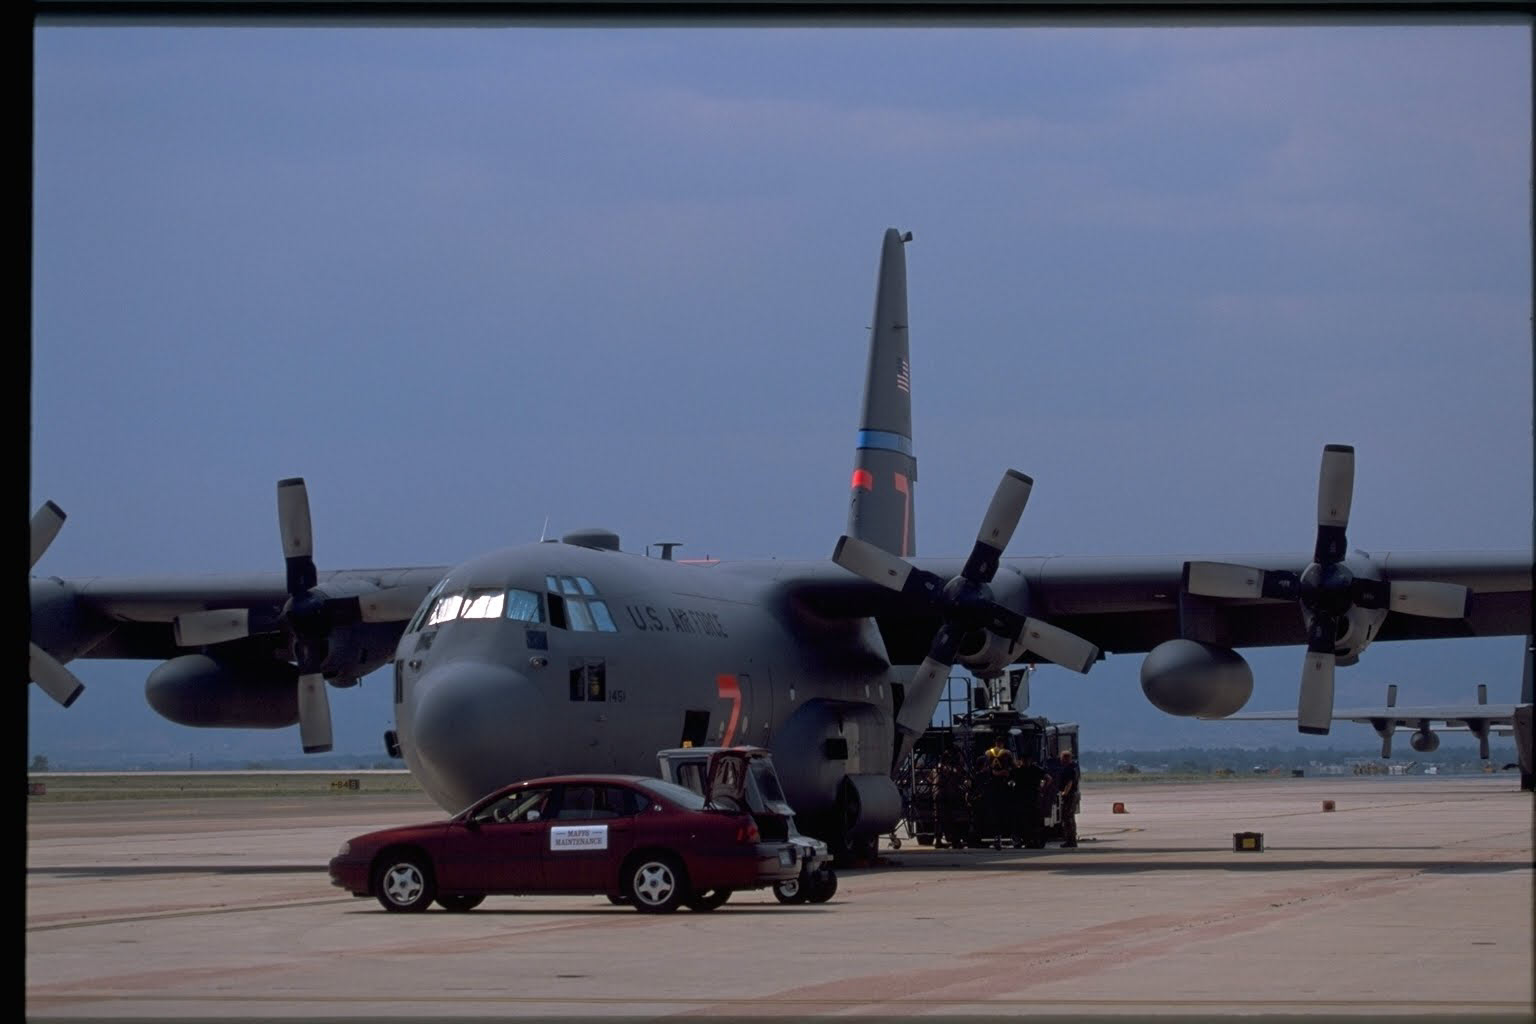 Modular Airborne Fire Fighting Systems (MAFFS) aircraft at an airport. A car and small vehicle are parked in front of the aircraft.